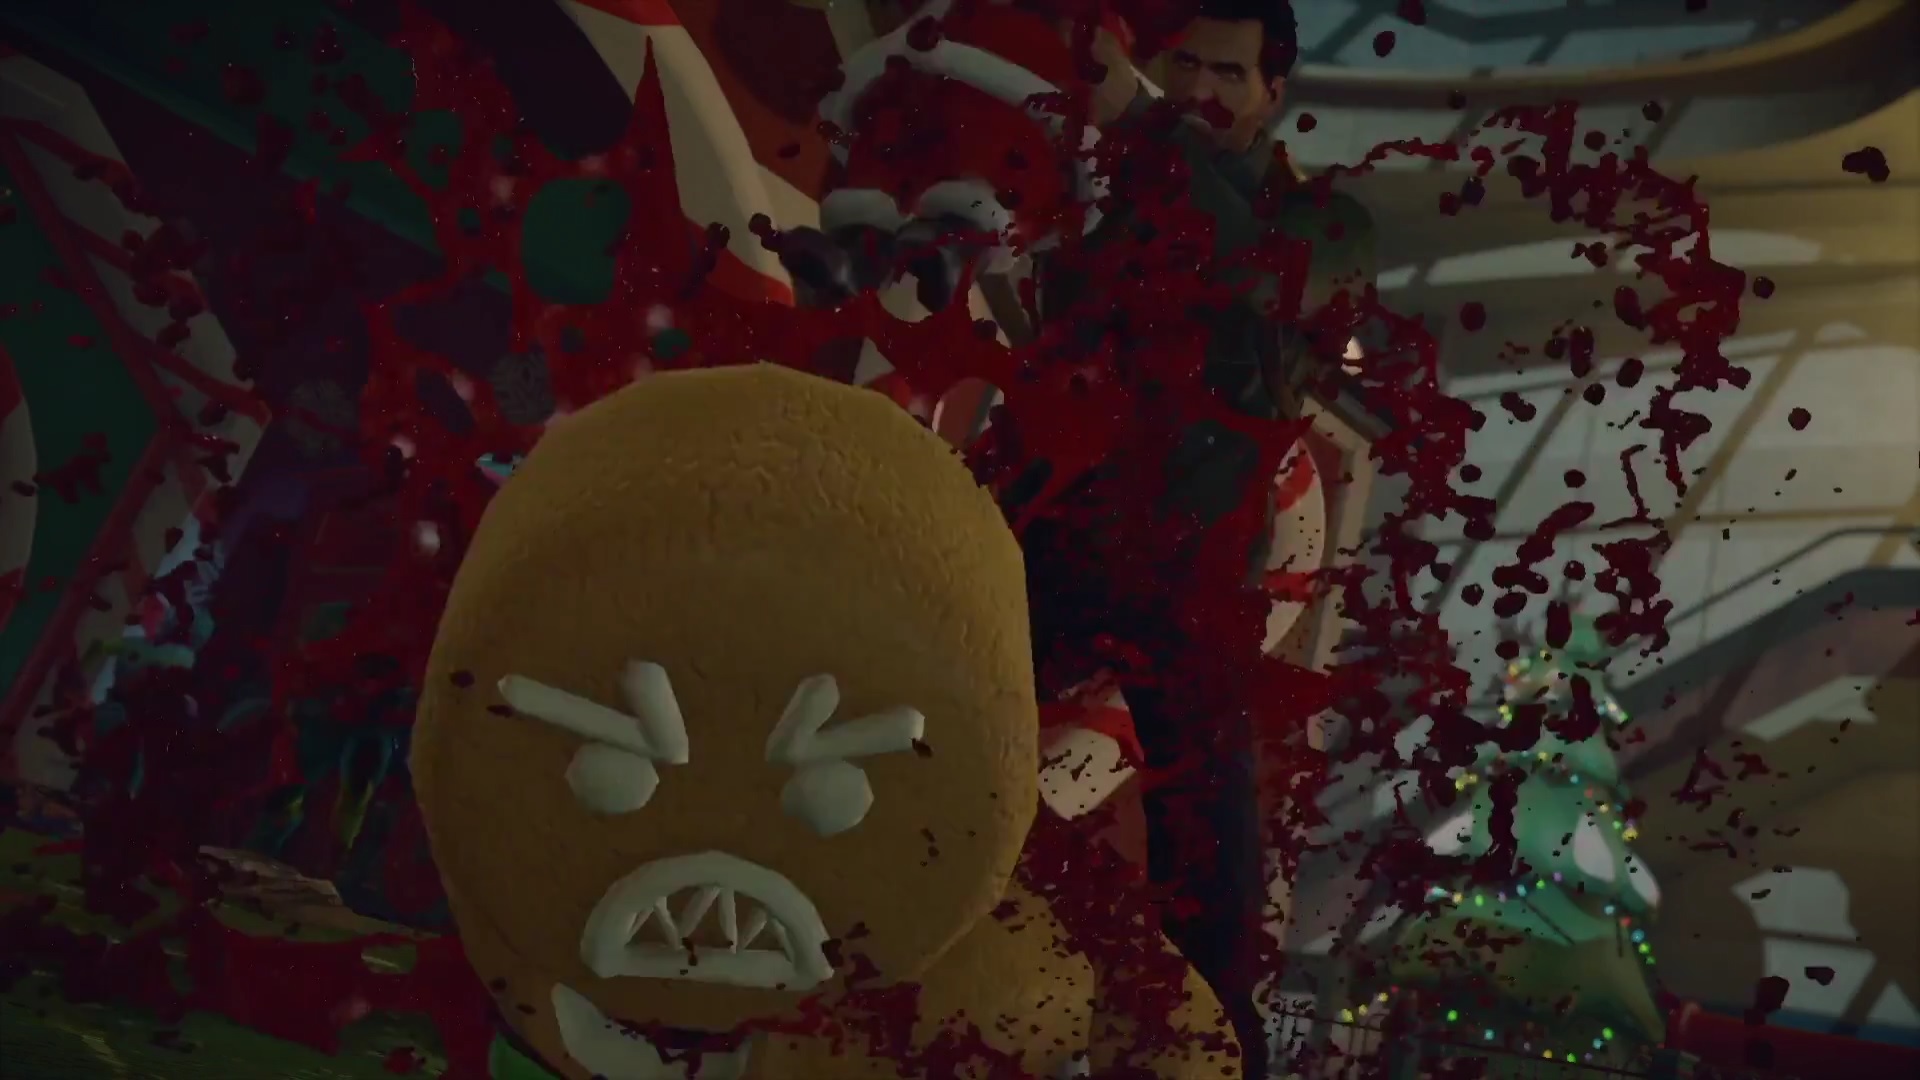 Dead Rising 4 is the non-Christmas Christmas game - Polygon